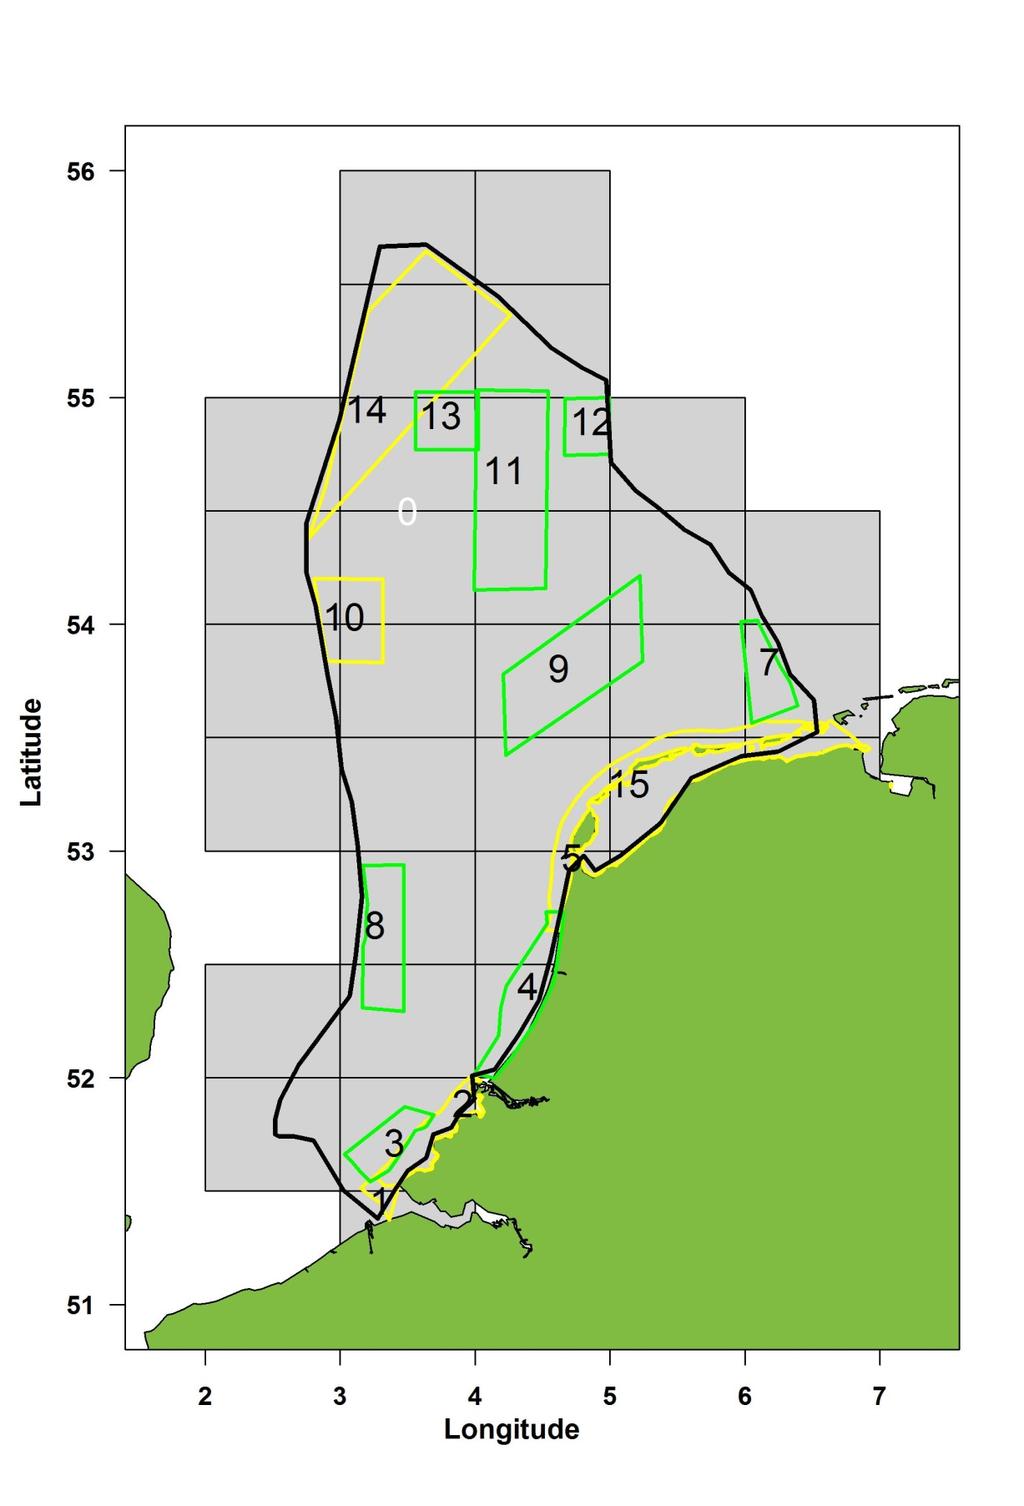 Figure 1 Overview of current (yellow demarcation lines) and proposed (green demarcation lines) MPAs by